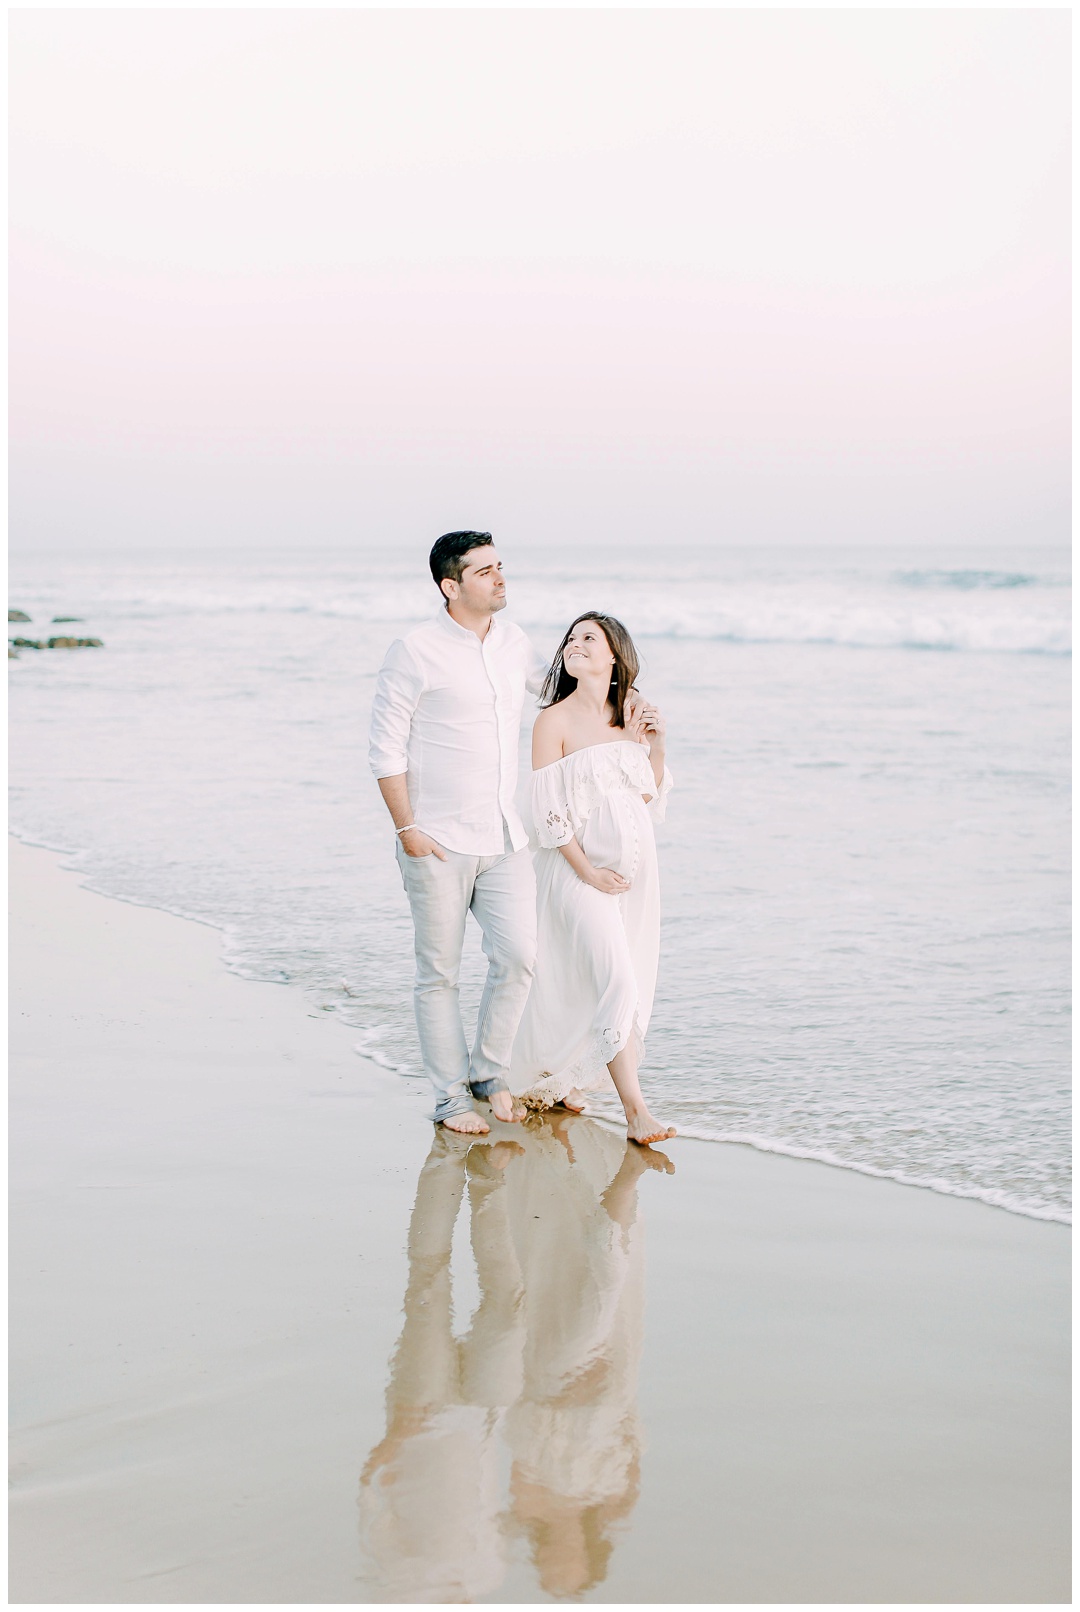 Crystal-Cove-State-Beach-Maternity-Session-Crystal-Cove-Newport-Beach-Maternity-Photographer-Crystal-Cove-Session-Cori-Kleckner-Photography-Orange-County-Maternity-Family-Photos-Session-_0886.jpg